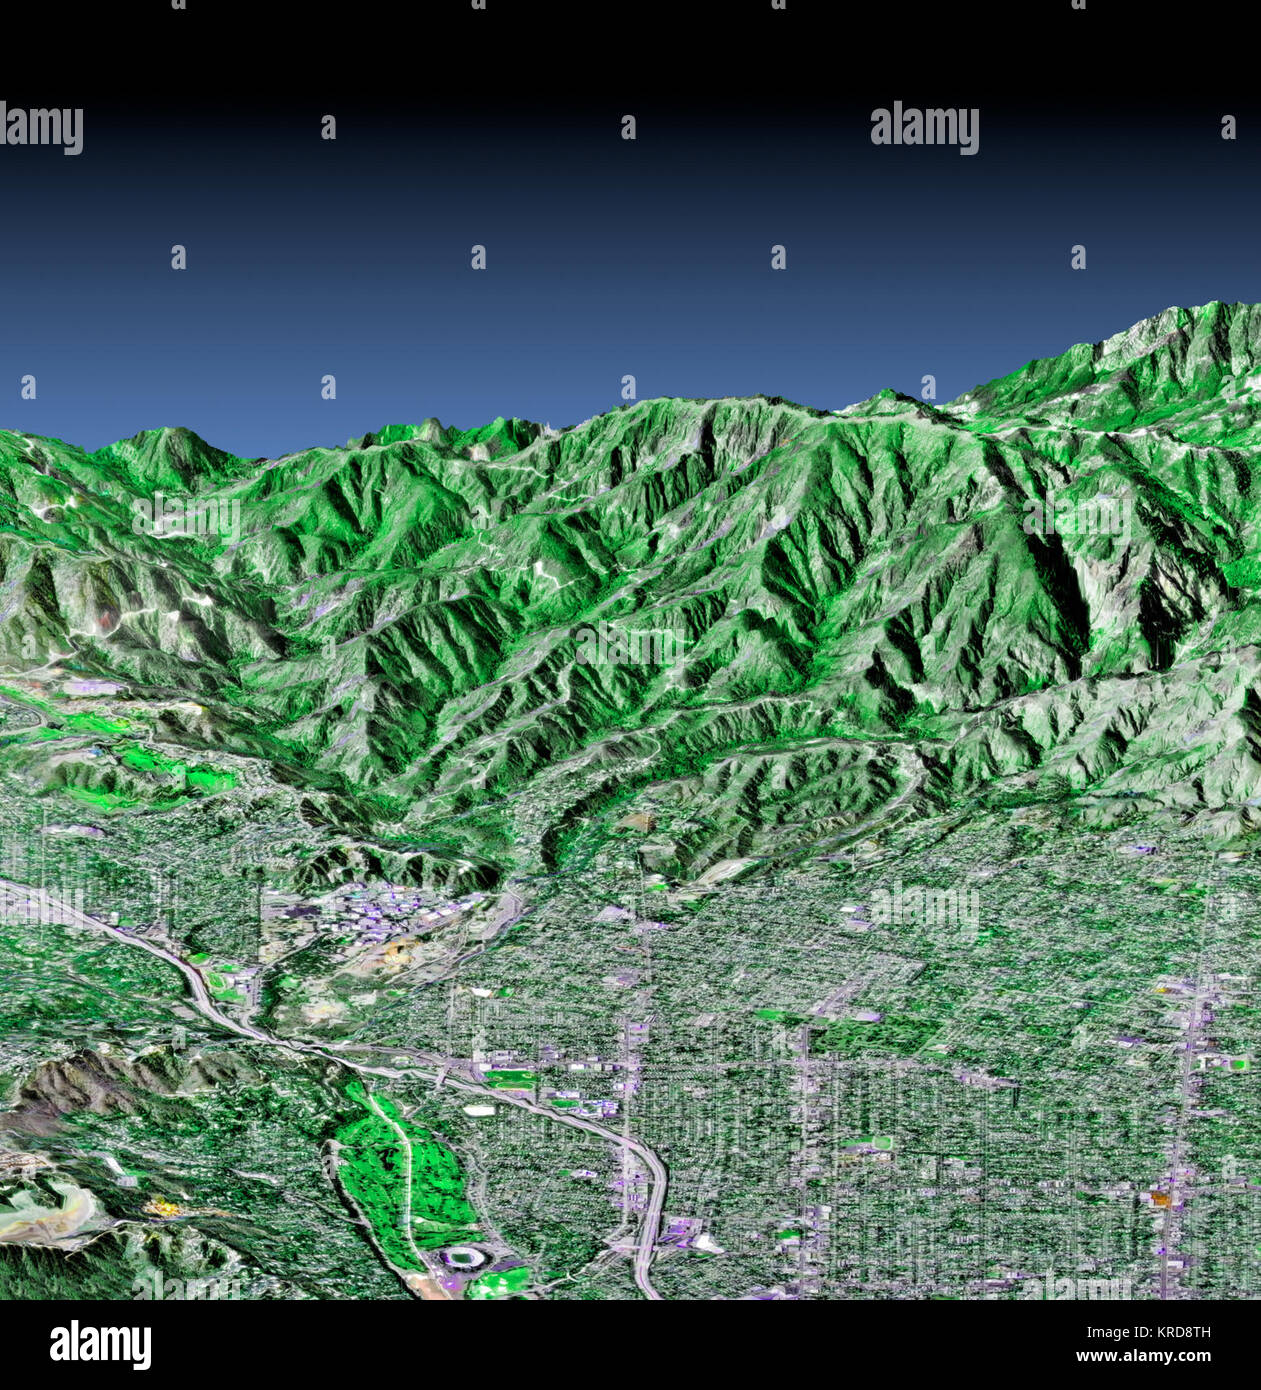 This perspective view shows the western part of the city of Pasadena, California, looking north towards the San Gabriel Mountains. Portions of the cities of Altadena and La Canada, Flintridge are also shown. The image was created from three datasets: the Shuttle Radar Topography Mission (SRTM) supplied the elevation data; Landsat data from November 11, 1986 provided the land surface color (not the sky) and U.S. Geological Survey digital aerial photography provides the image detail. The Rose Bowl, surrounded by a golf course, is the circular feature at the bottom center of the image. The Jet Pr Stock Photo